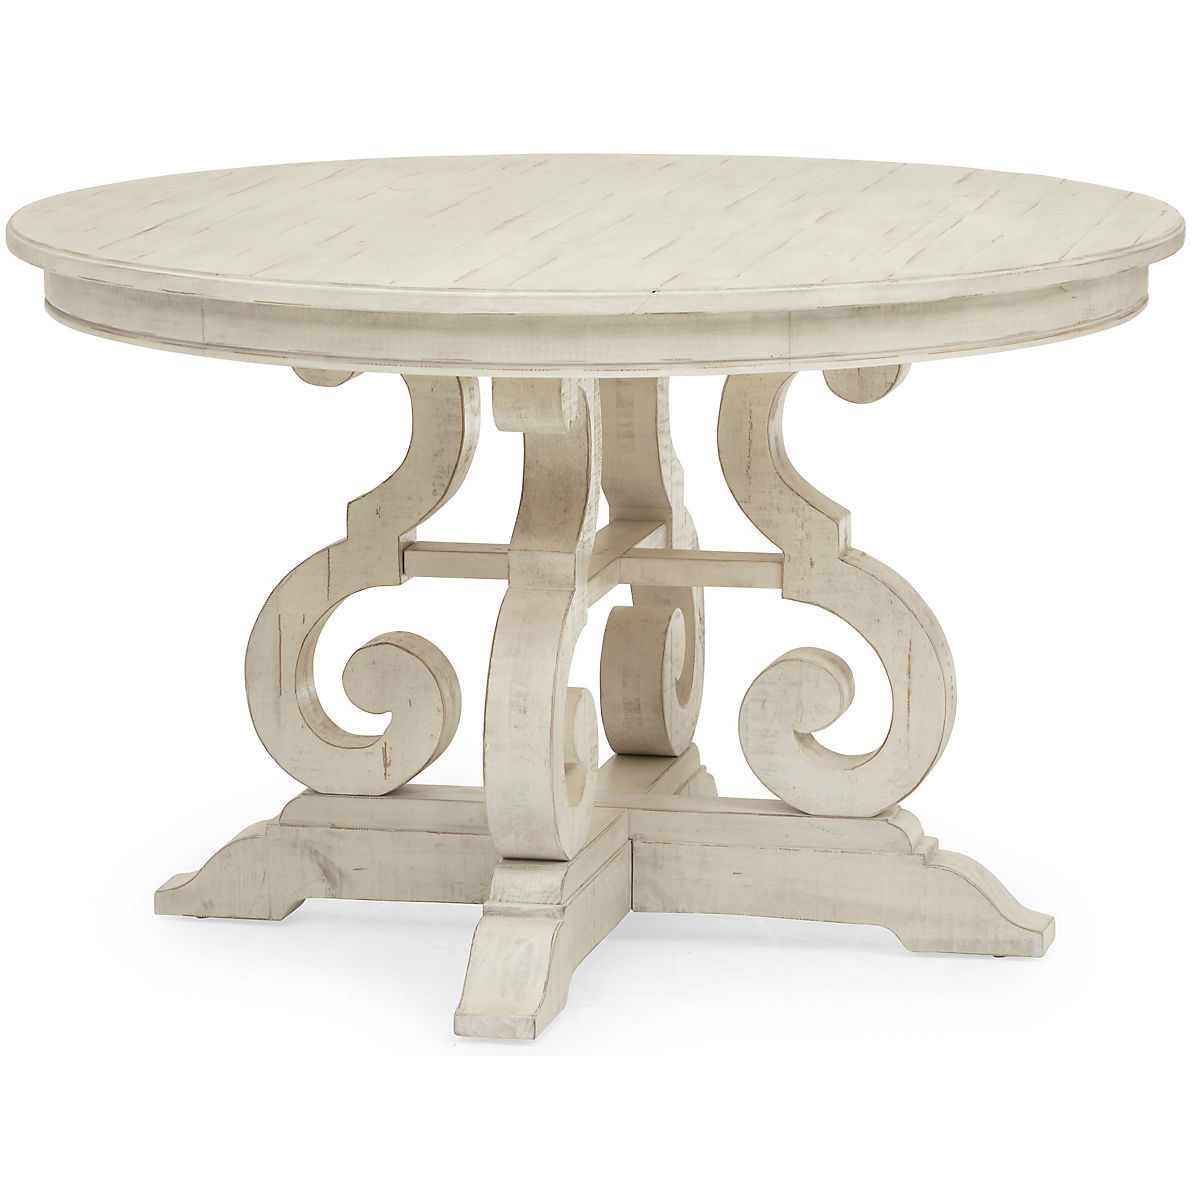 Treble 48 Inch Round Dining Table, Round 48 Dining Table Set